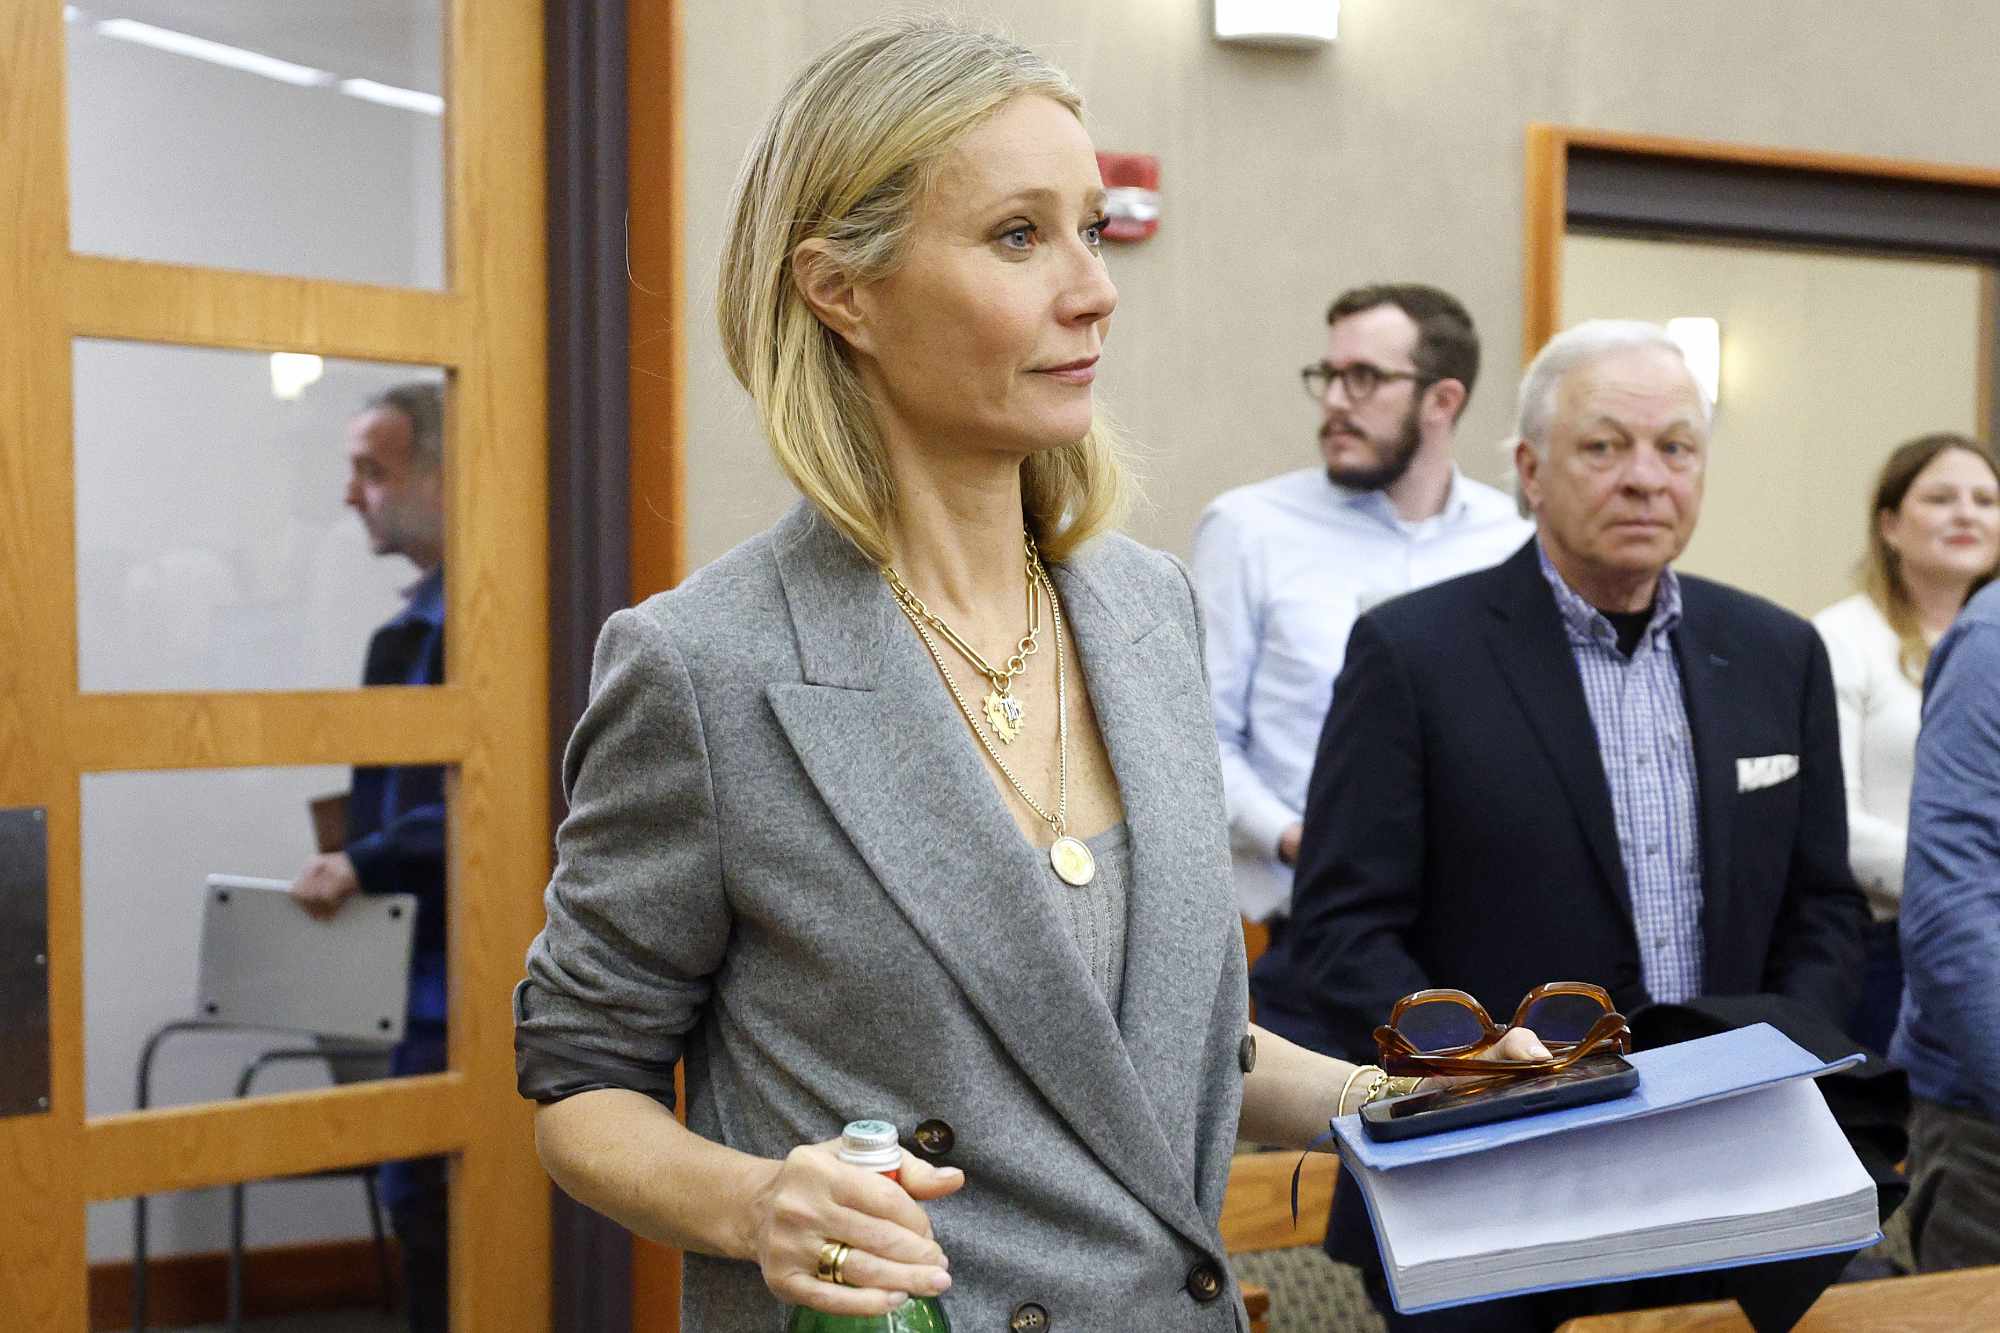 Gwyneth Paltrow enters a Utah courtroom in a grey suit